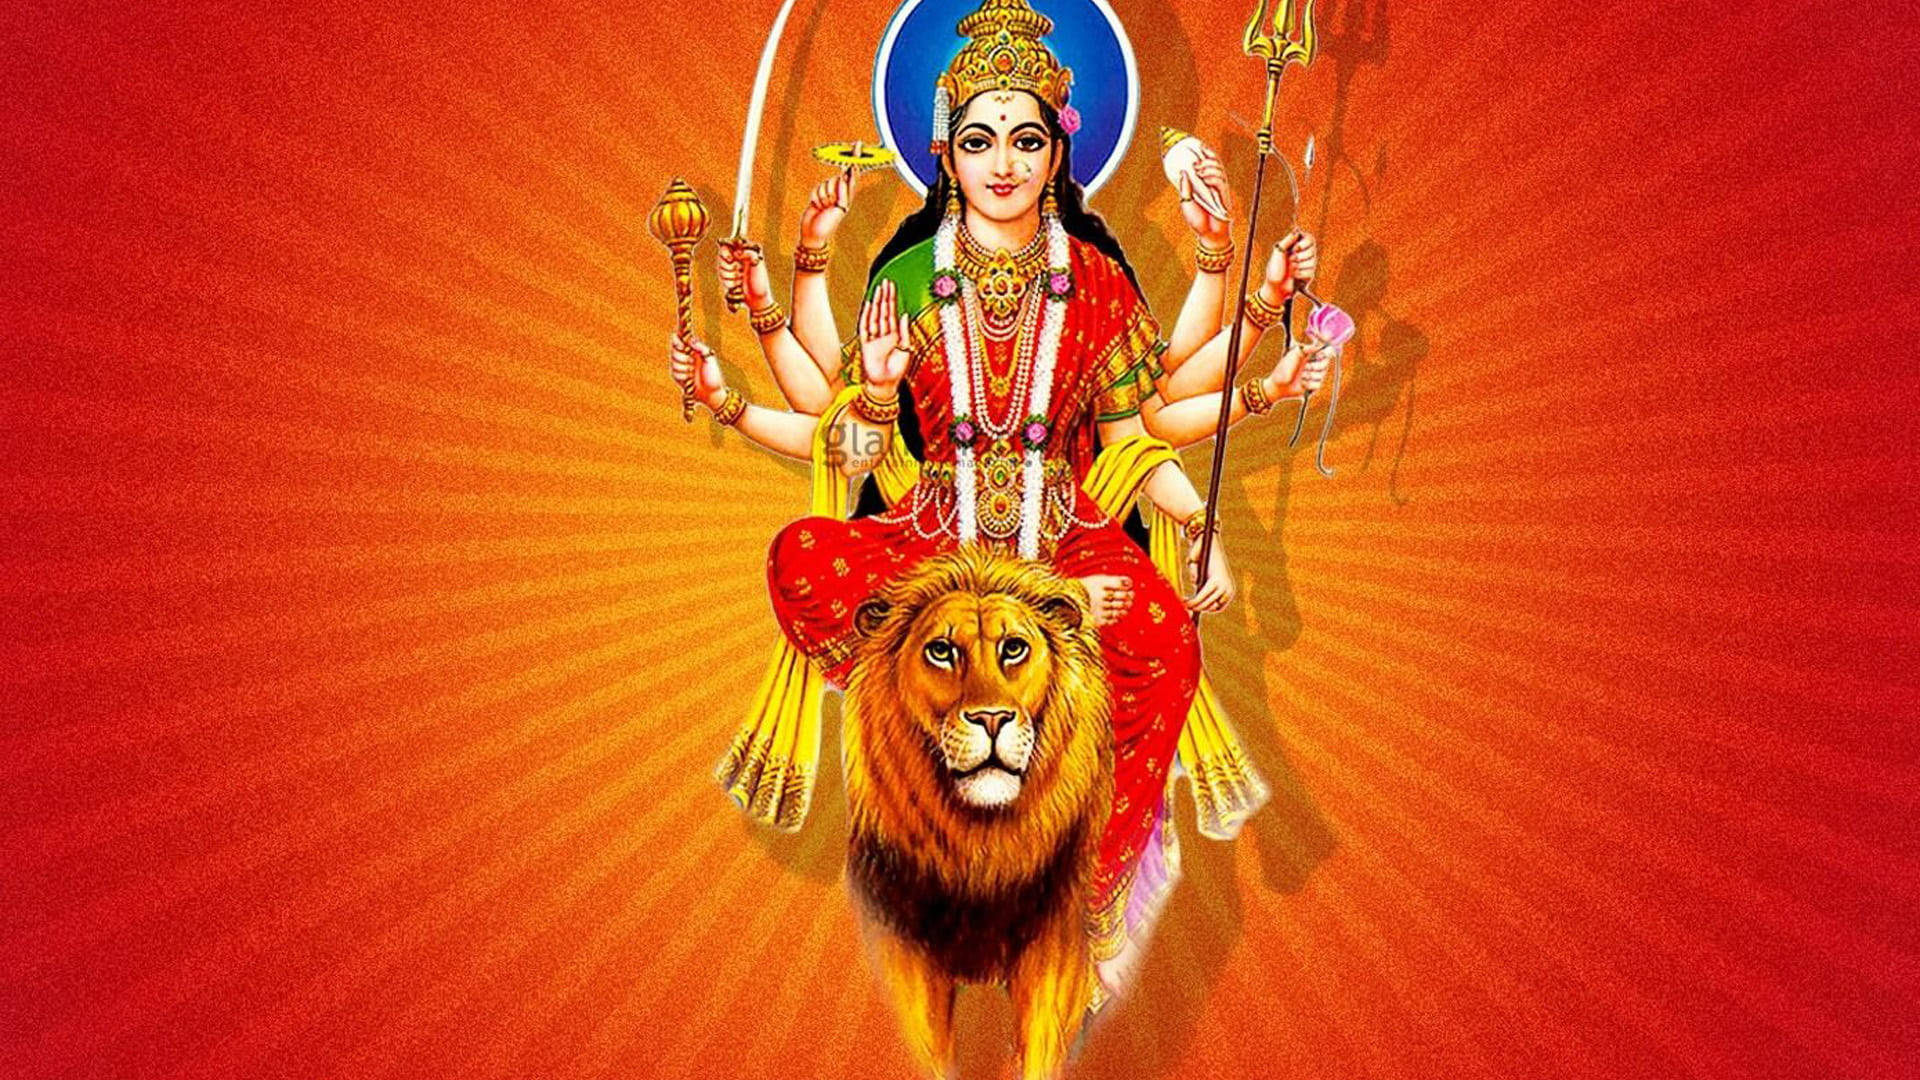 Incredible Collection of Maa Durga Images - Free Download in Full 4K  Resolution